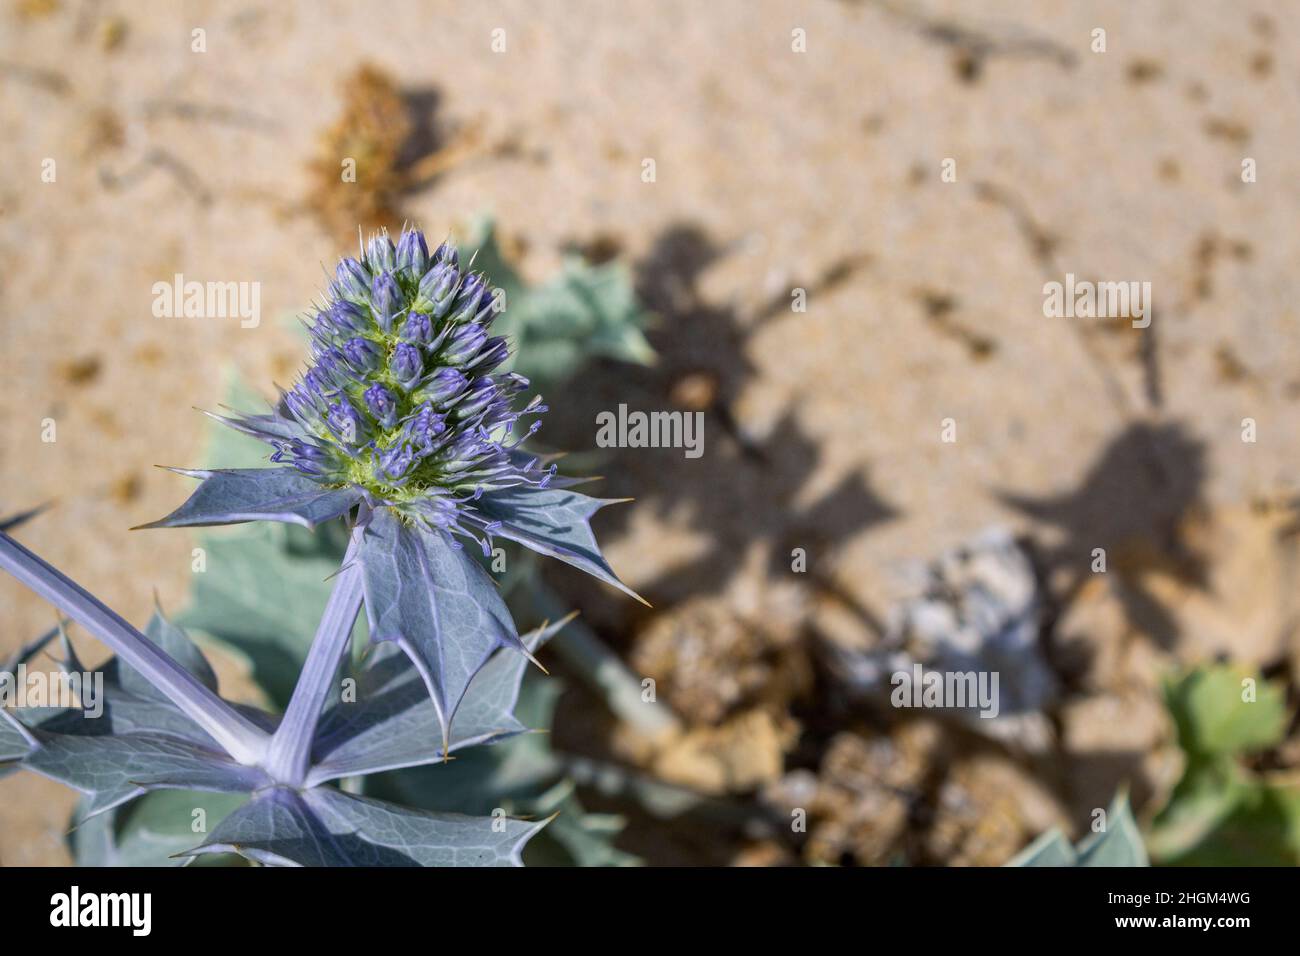 Eryngium maritimum, the sea holly or seaside eryngo, native to most European coastlines and although widespread, it is considered endangered in many a Stock Photo